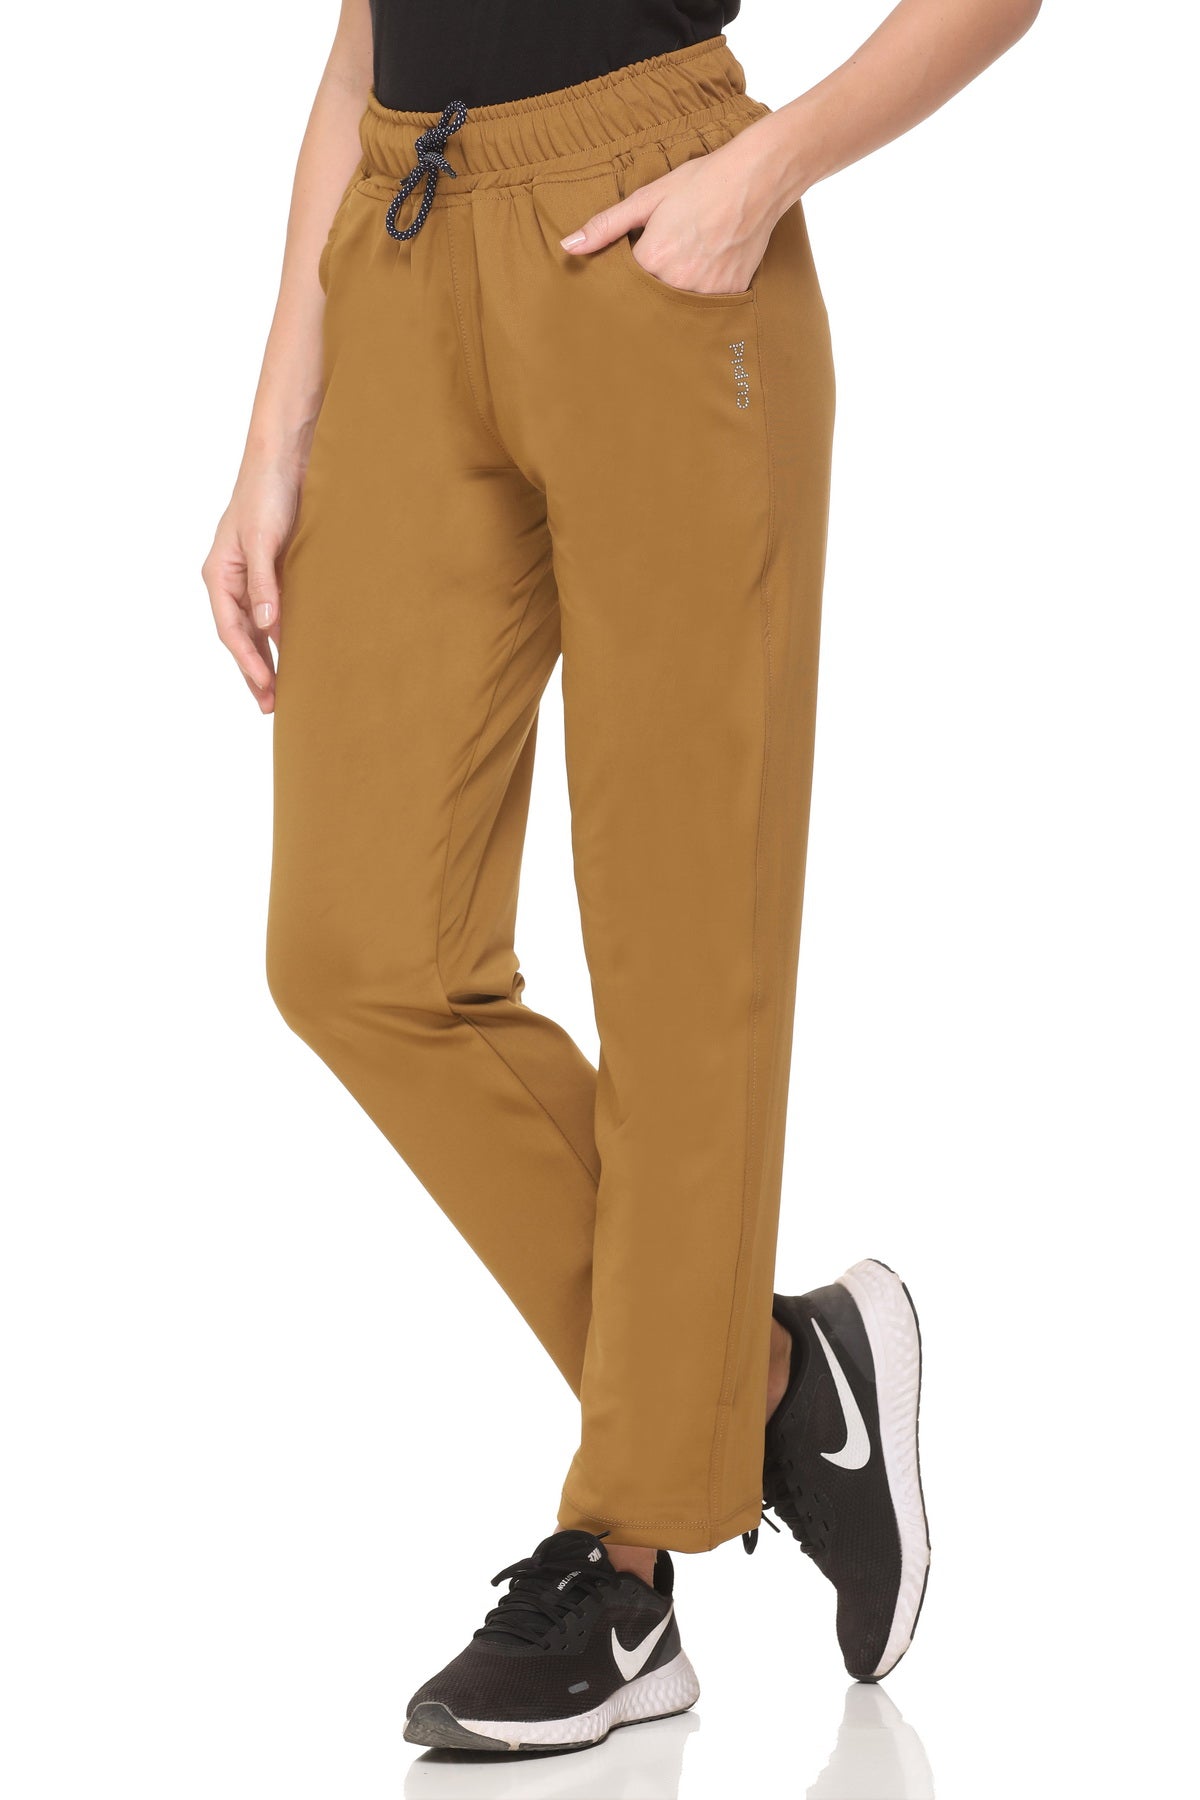 Stylish Mustard Yellow Cotton Dry Fit Gym Pants For Women Online In India